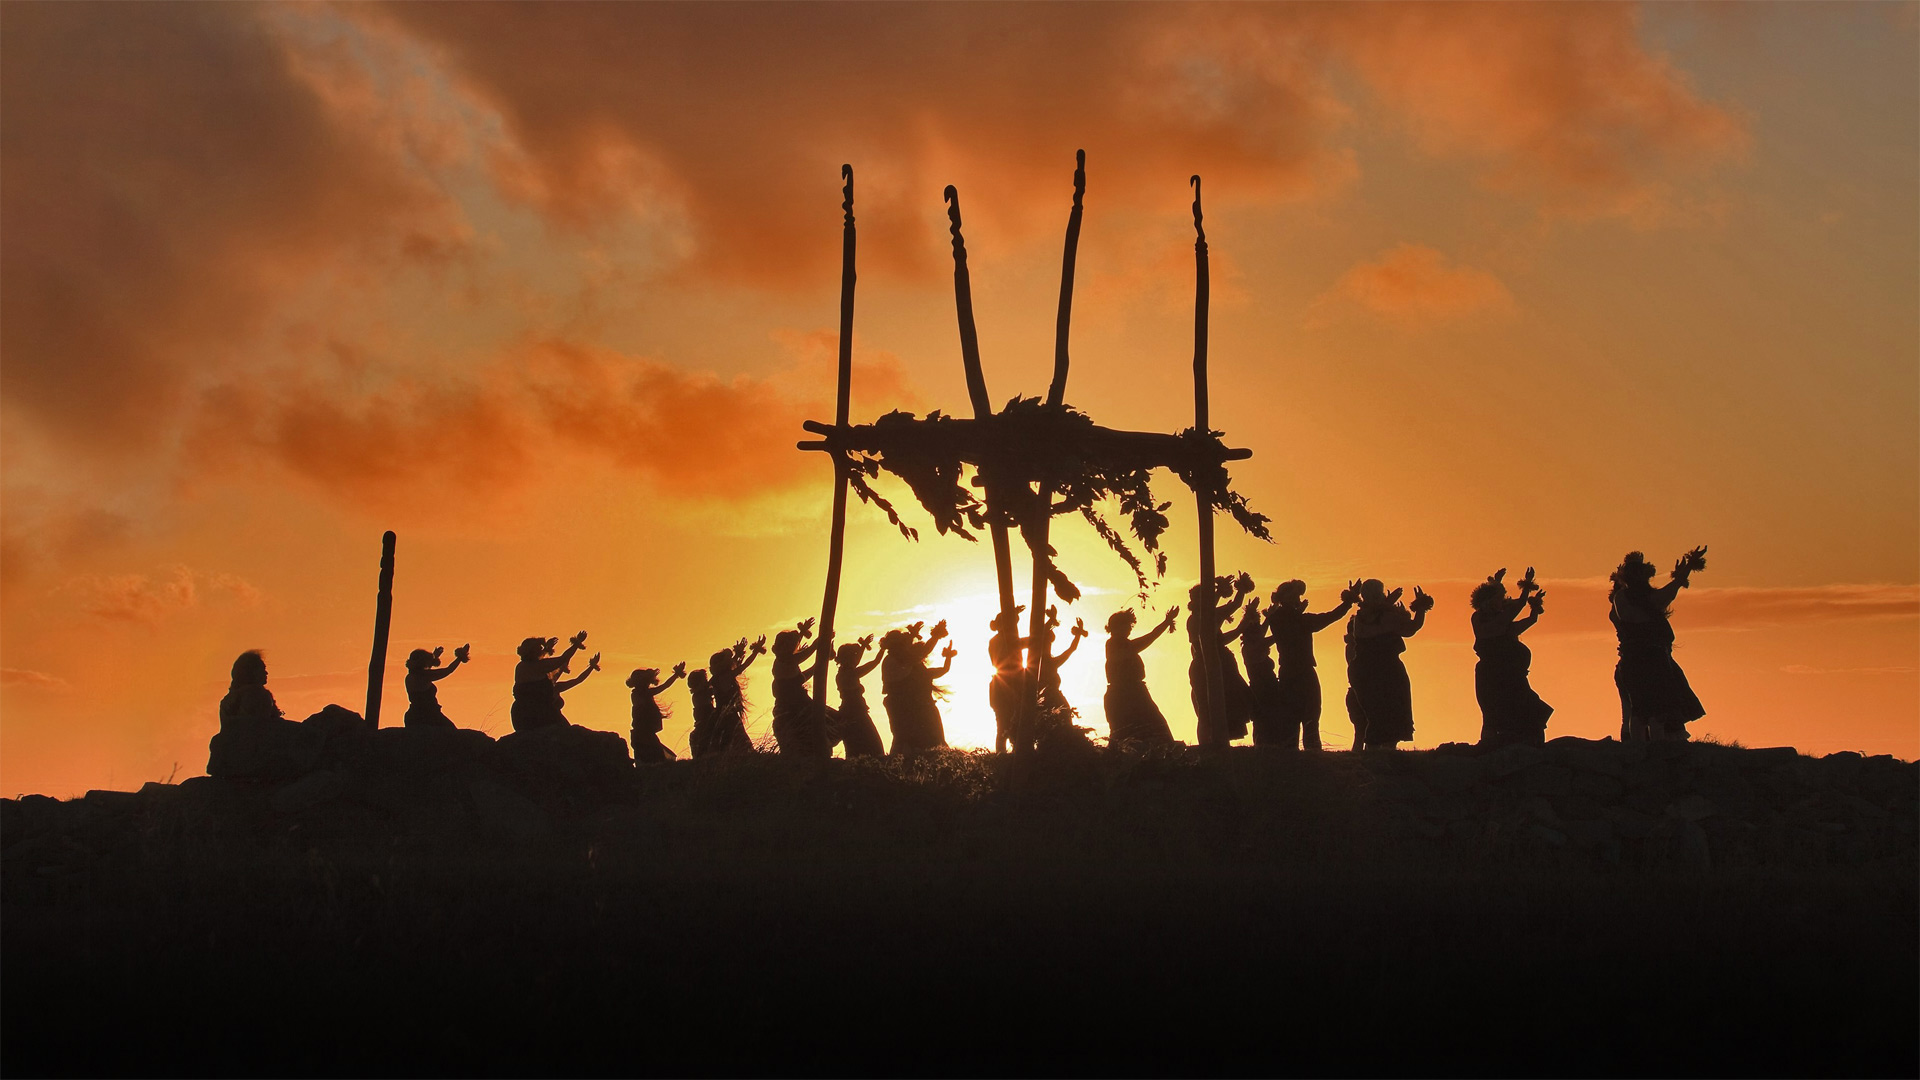 Bing Lei Day Silhouette Sunset People Ceremony 1920x1080